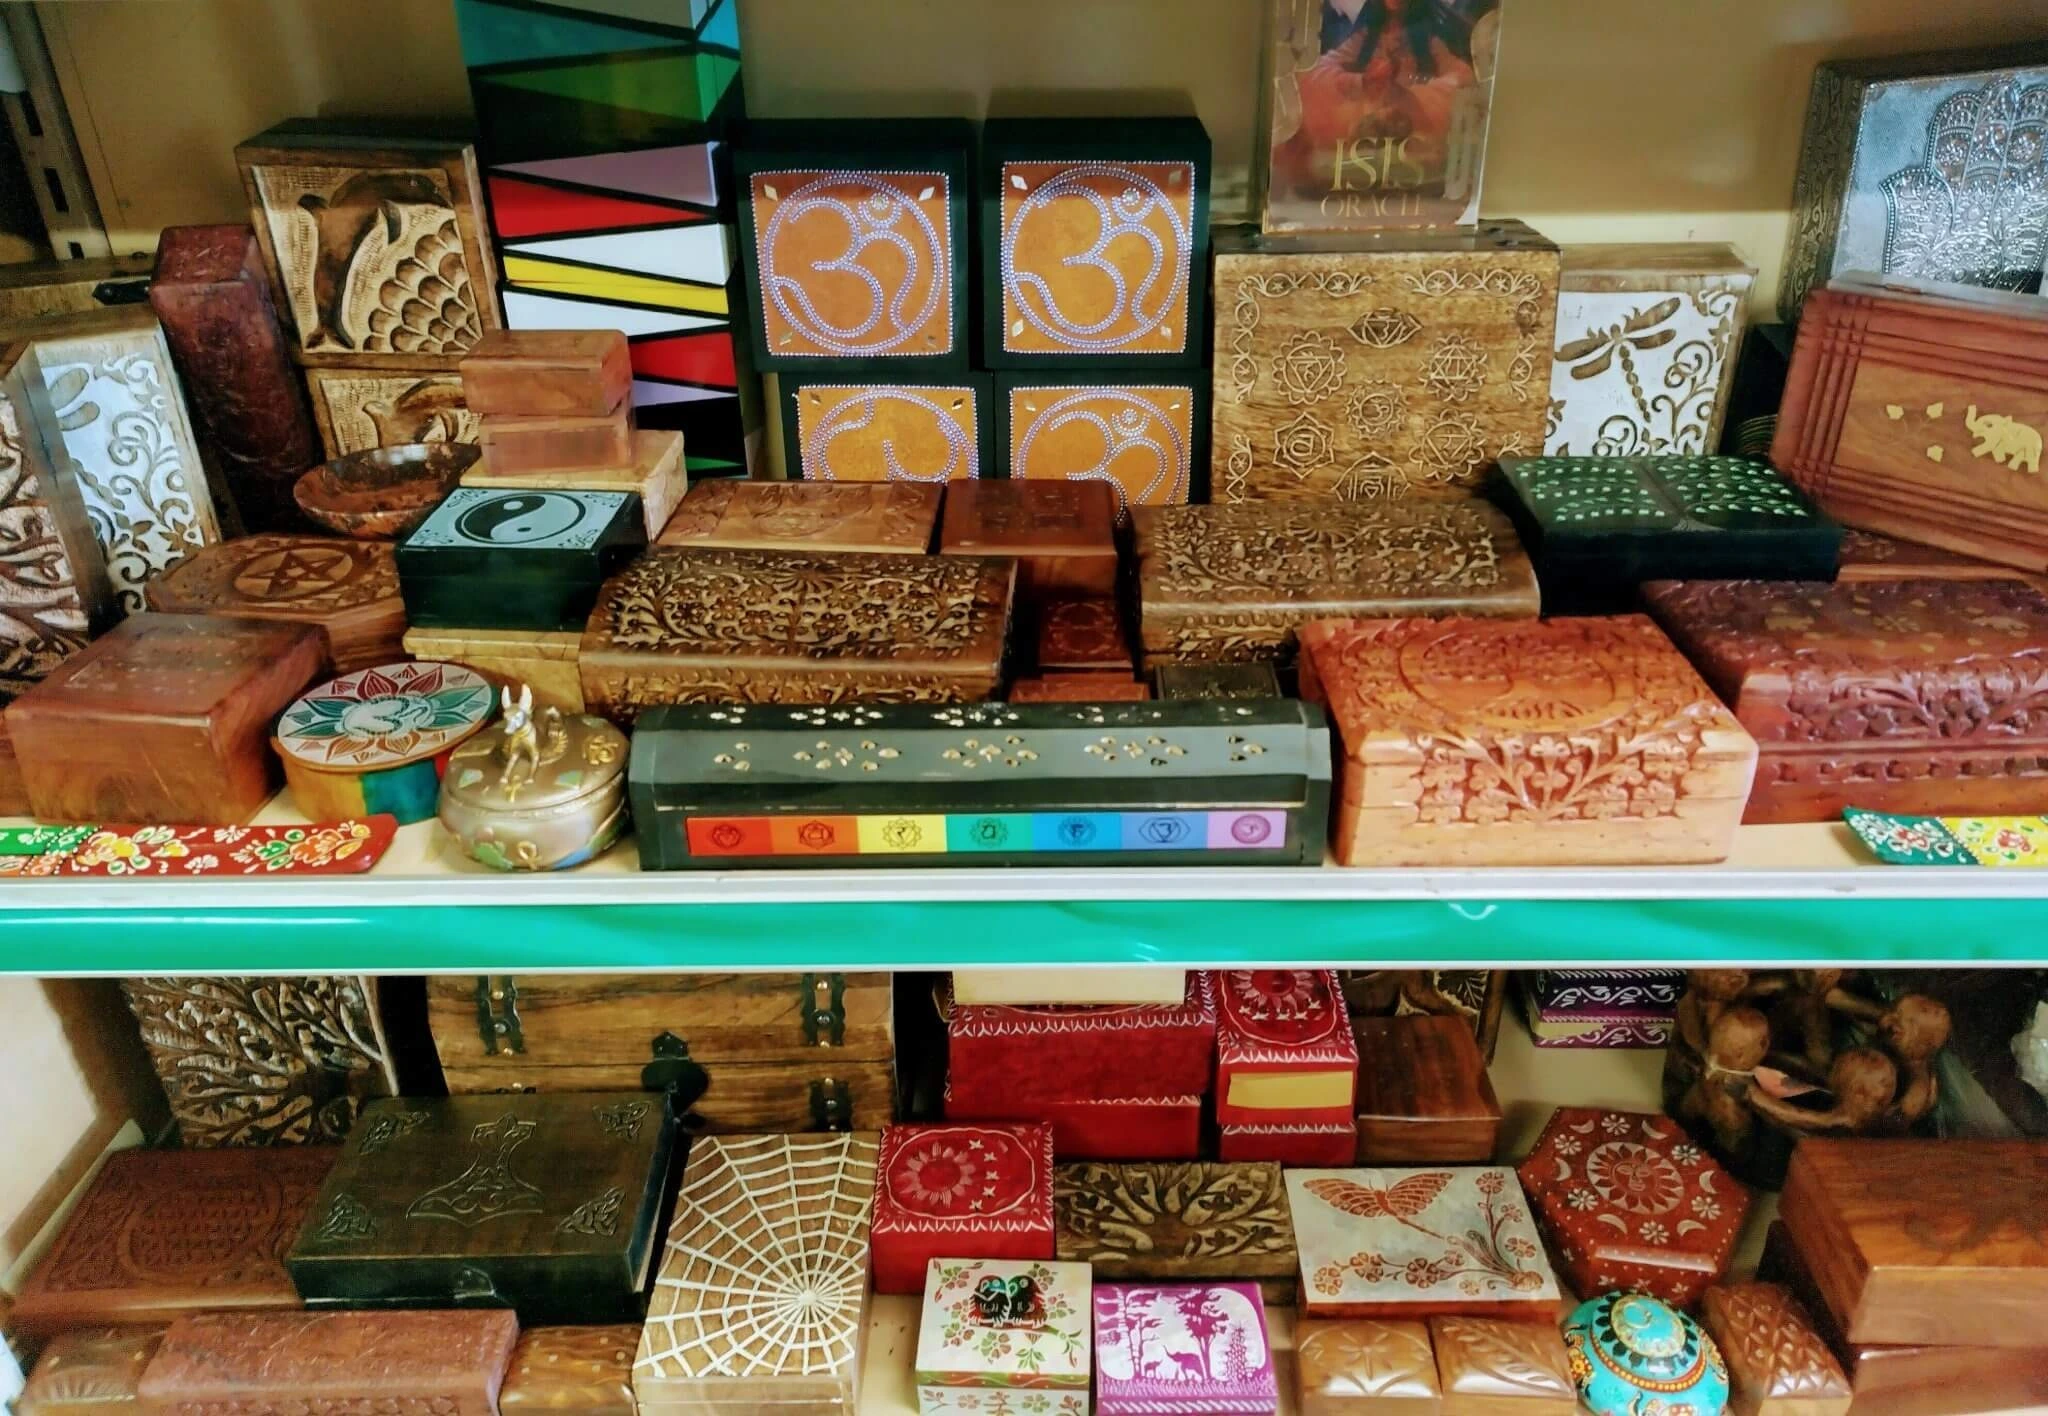 A display of incense